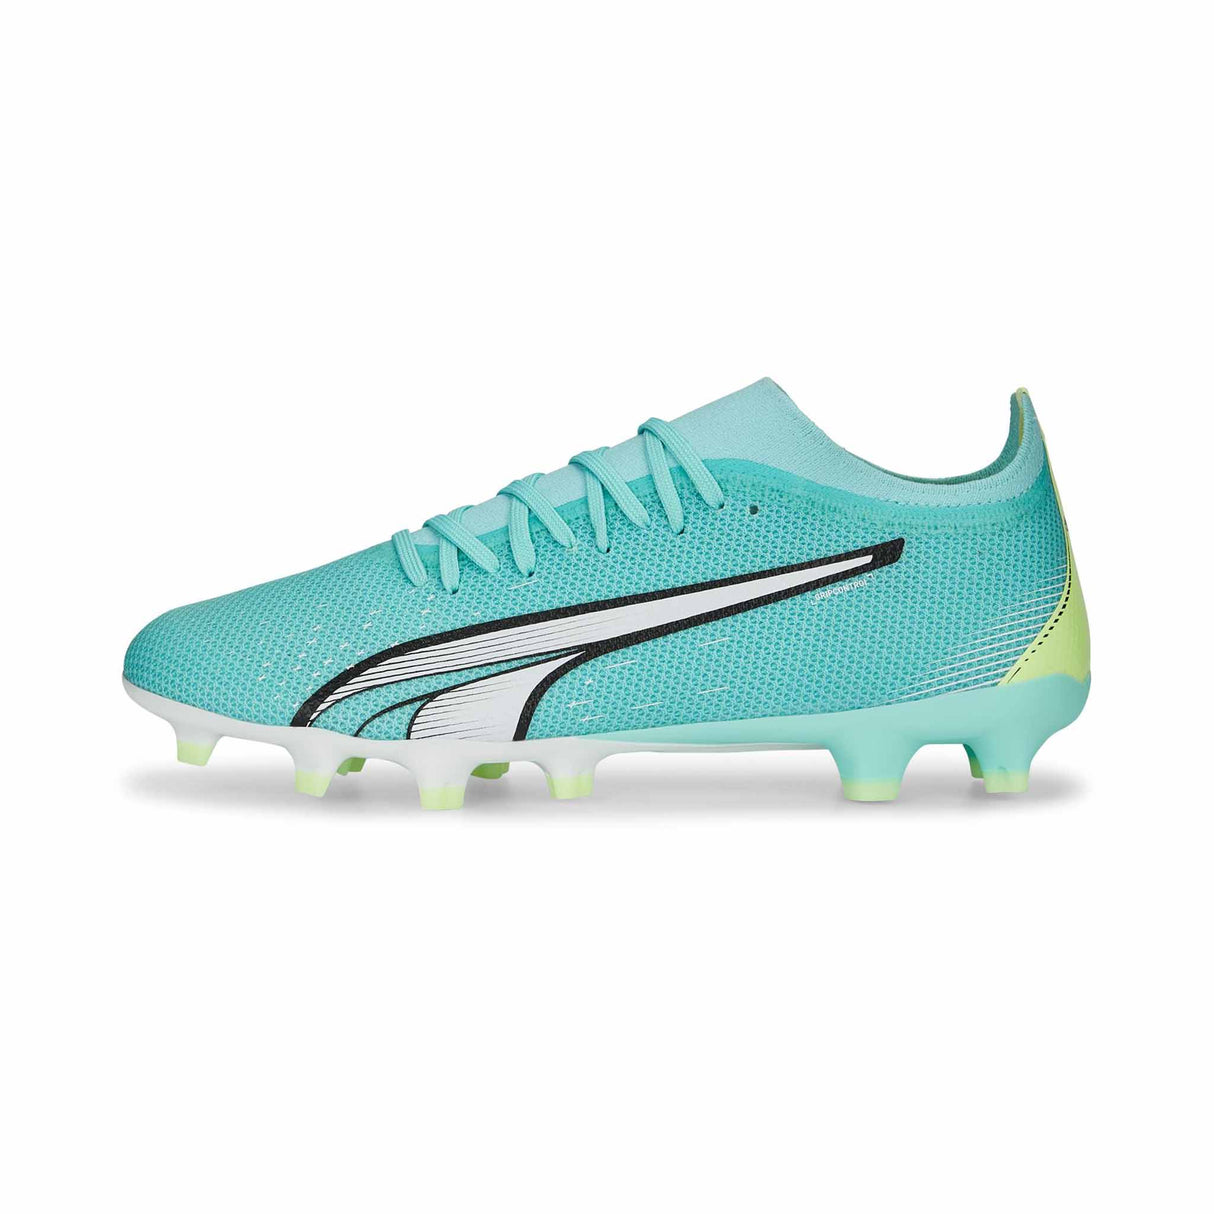 Puma Ultra Match FG/AG chaussures de soccer a crampons - Electric Peppermint / Puma White / Fast Yellow